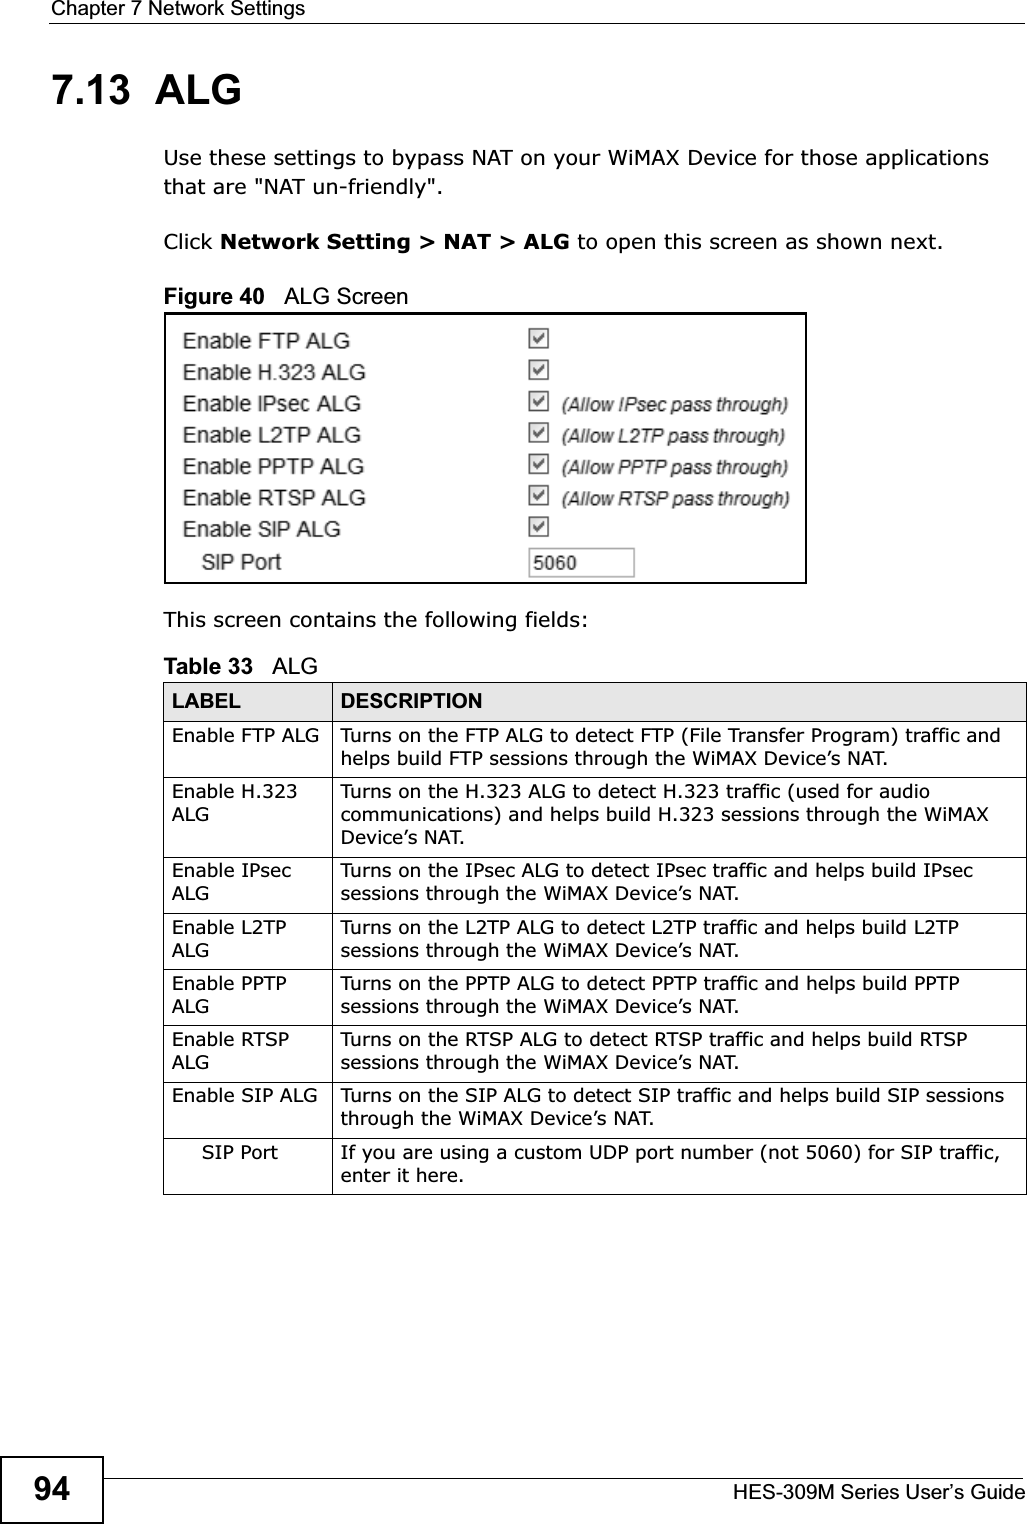 Chapter 7 Network SettingsHES-309M Series User’s Guide947.13  ALGUse these settings to bypass NAT on your WiMAX Device for those applications that are &quot;NAT un-friendly&quot;.Click Network Setting &gt; NAT &gt; ALG to open this screen as shown next.Figure 40   ALG ScreenThis screen contains the following fields:Table 33   ALGLABEL DESCRIPTIONEnable FTP ALG Turns on the FTP ALG to detect FTP (File Transfer Program) traffic and helps build FTP sessions through the WiMAX Device’s NAT. Enable H.323 ALGTurns on the H.323 ALG to detect H.323 traffic (used for audio communications) and helps build H.323 sessions through the WiMAX Device’s NAT. Enable IPsec ALGTurns on the IPsec ALG to detect IPsec traffic and helps build IPsec sessions through the WiMAX Device’s NAT. Enable L2TP ALGTurns on the L2TP ALG to detect L2TP traffic and helps build L2TP sessions through the WiMAX Device’s NAT.Enable PPTP ALGTurns on the PPTP ALG to detect PPTP traffic and helps build PPTP sessions through the WiMAX Device’s NAT. Enable RTSP ALGTurns on the RTSP ALG to detect RTSP traffic and helps build RTSP sessions through the WiMAX Device’s NAT. Enable SIP ALG Turns on the SIP ALG to detect SIP traffic and helps build SIP sessions through the WiMAX Device’s NAT.SIP Port If you are using a custom UDP port number (not 5060) for SIP traffic, enter it here.